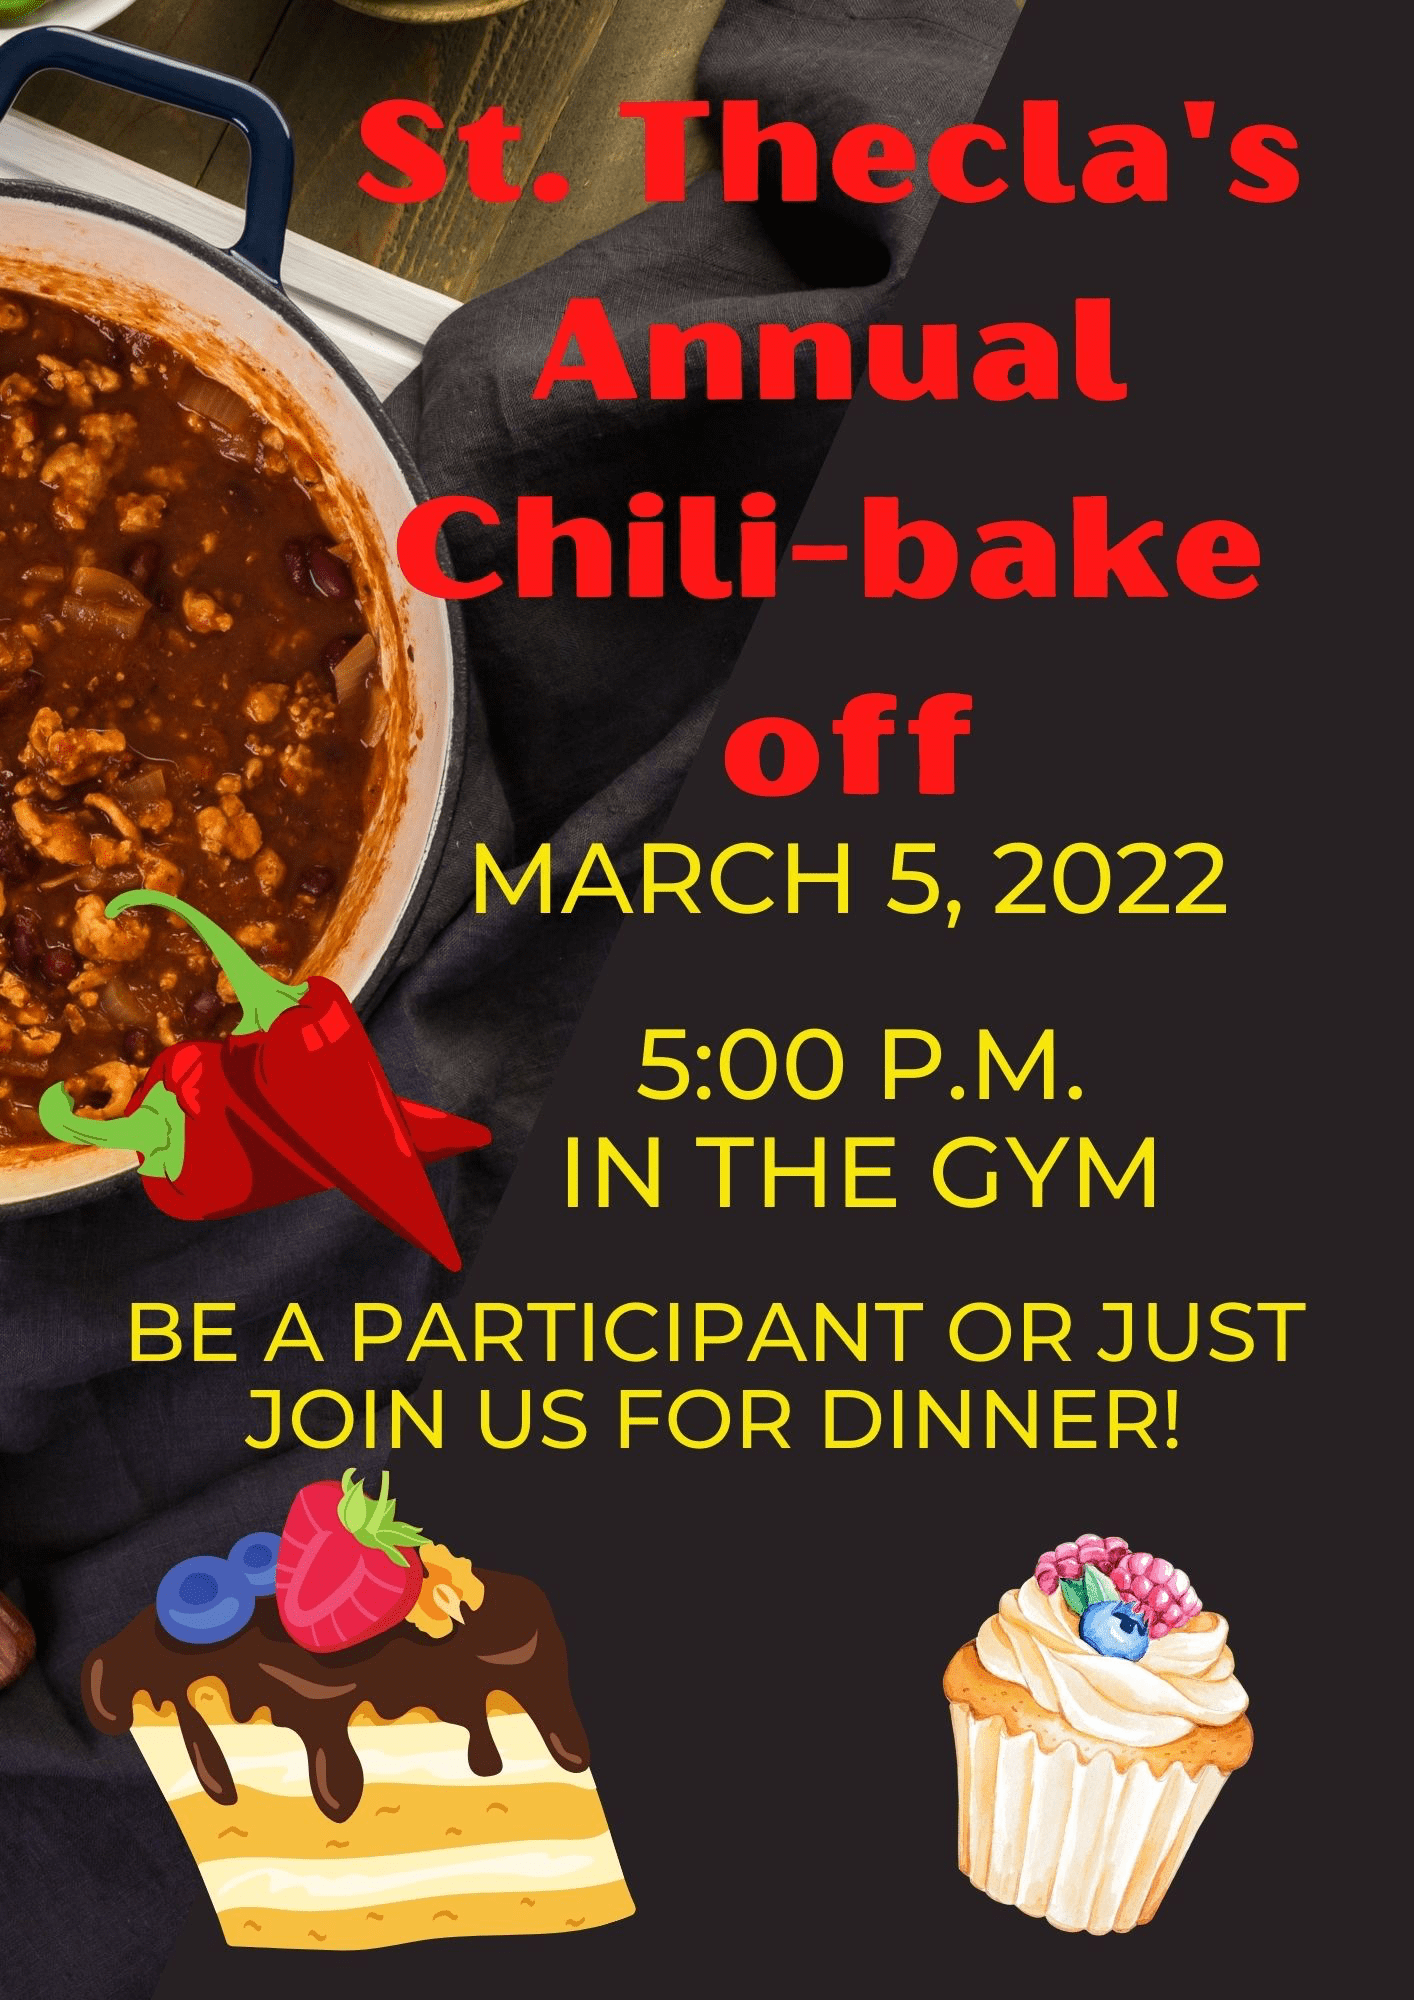 St. Thecla’s Annual Chili – Bake Off